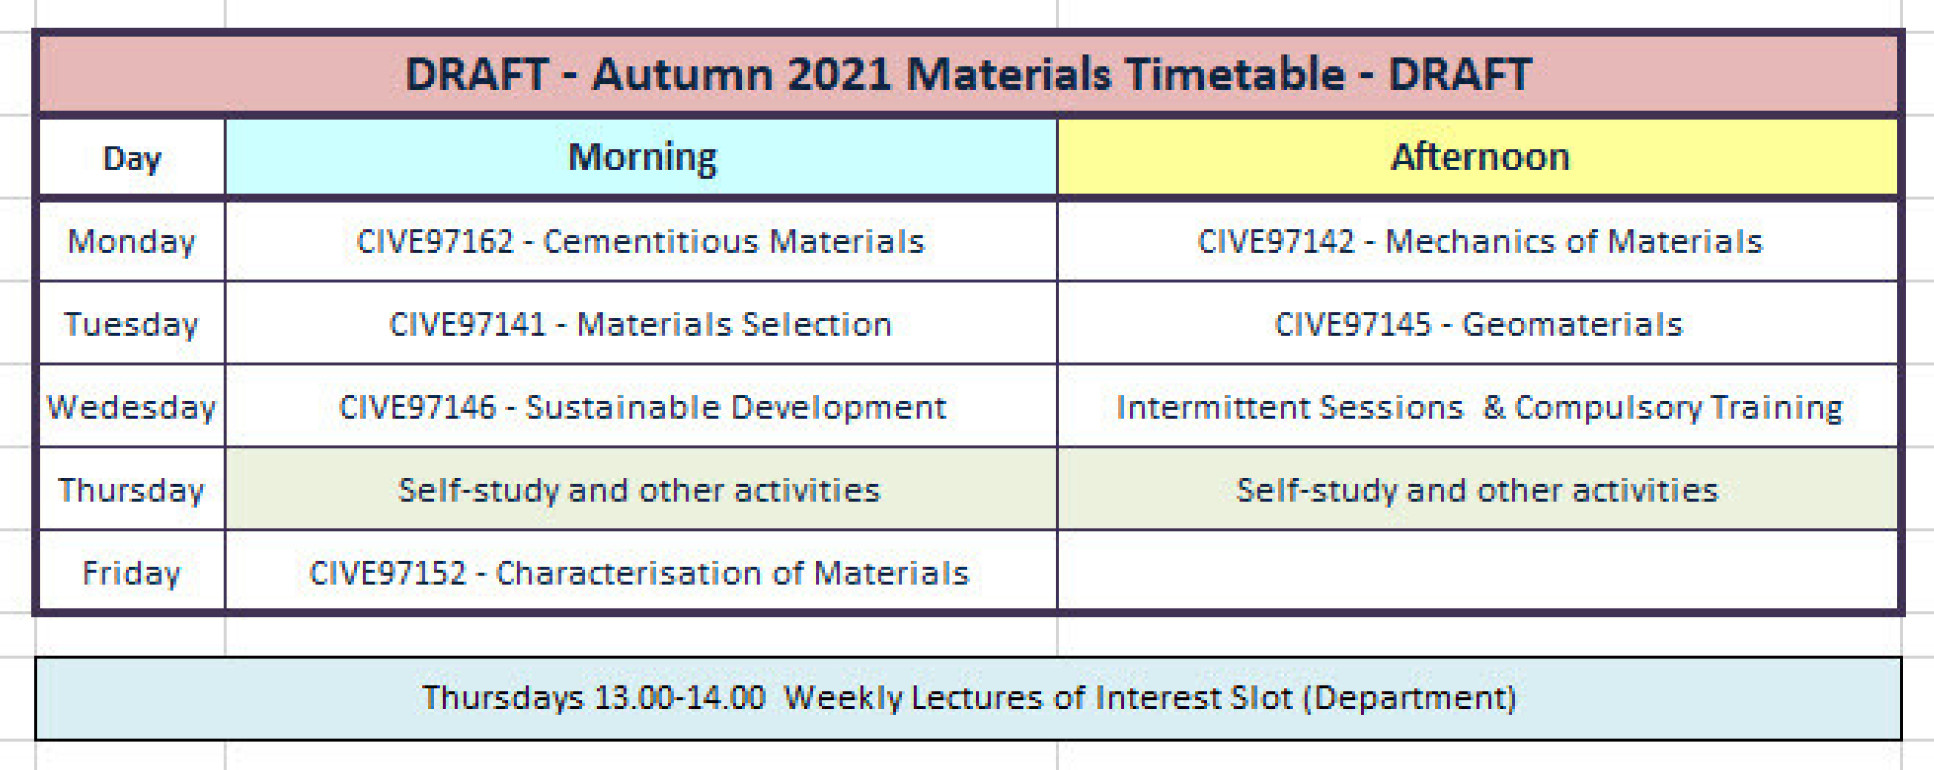 Indicative timetable